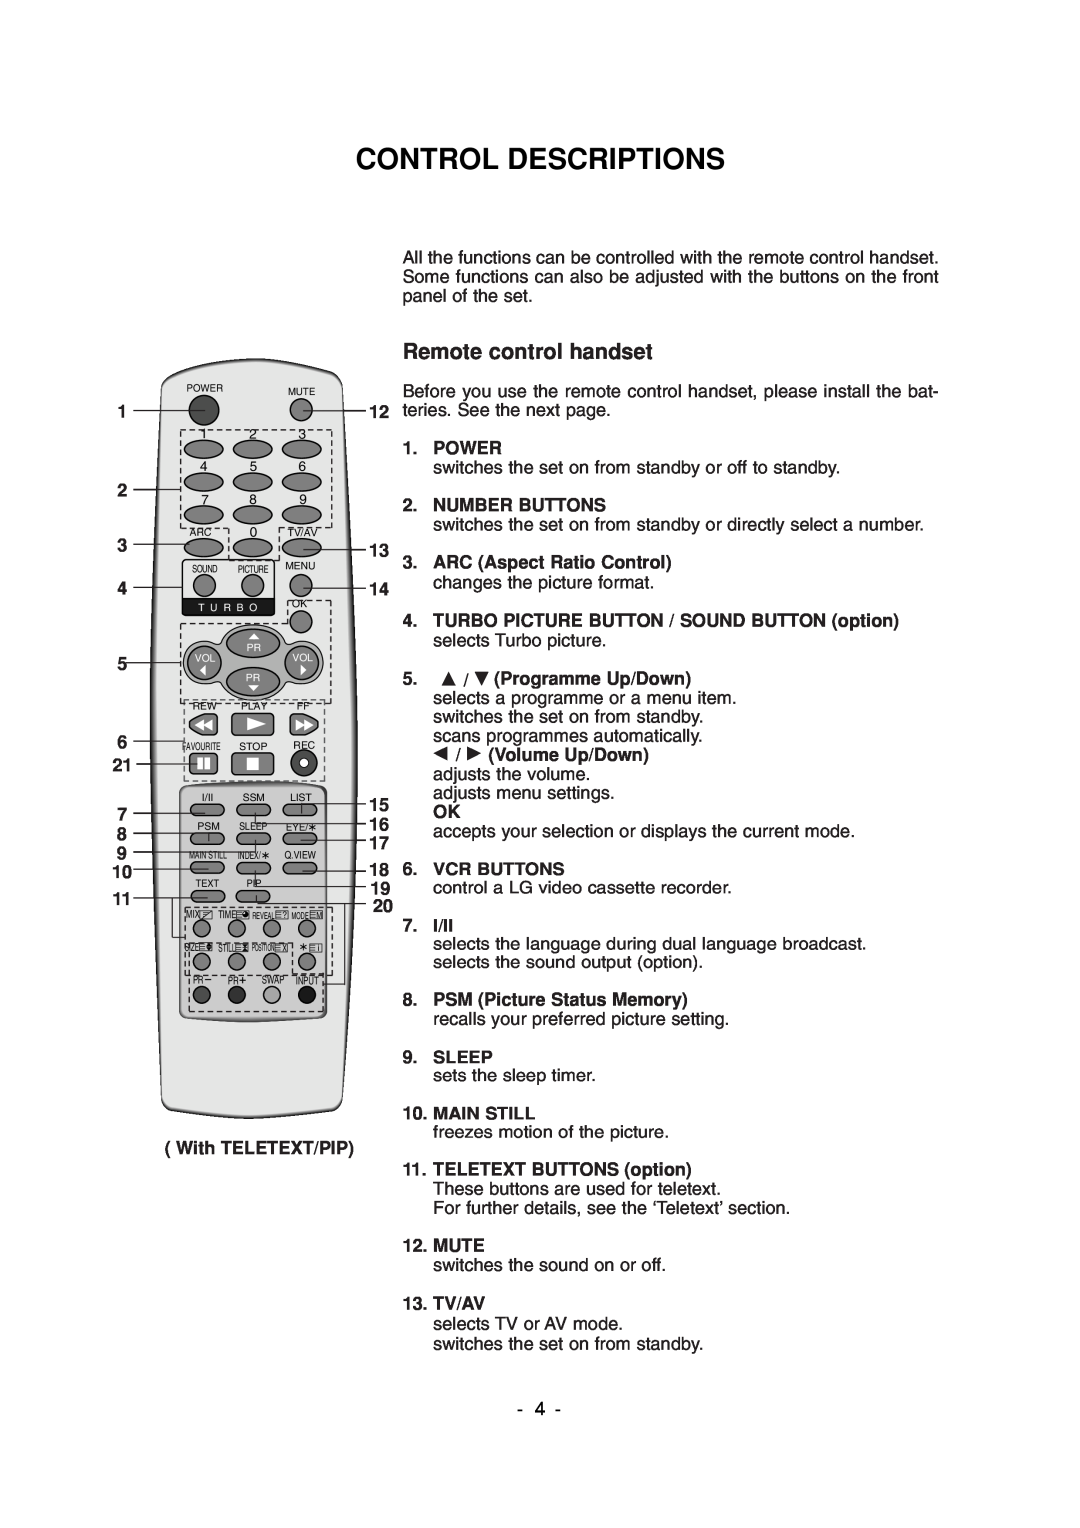 LG Electronics 29FS2AMB/ANX-ZE Control Descriptions, recalls your preferred picture setting, sets the sleep timer 